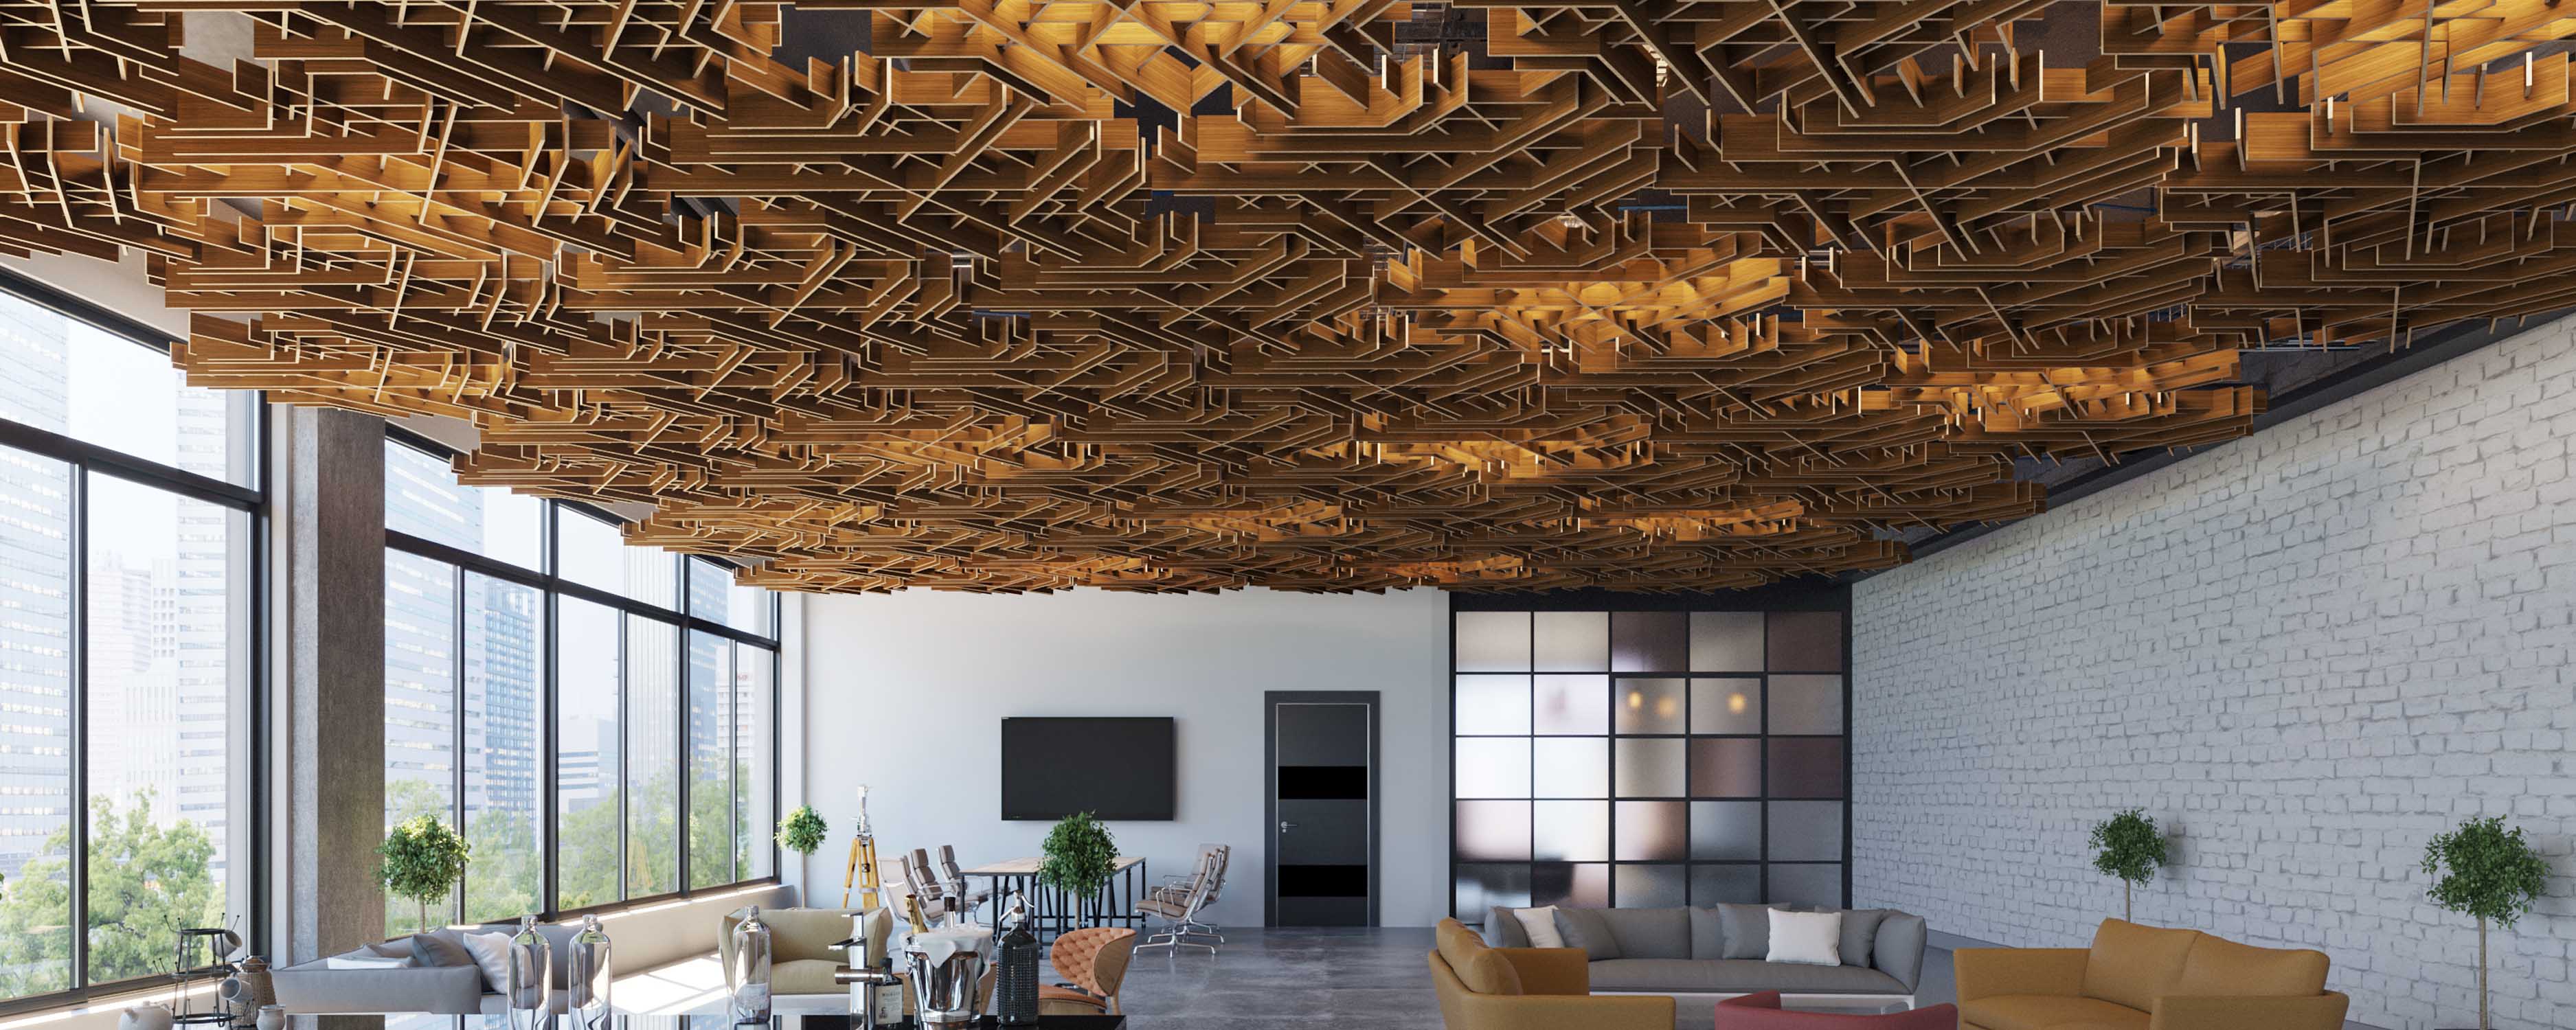 Architectural Wall Ceiling Panels Manufacturer Arktura